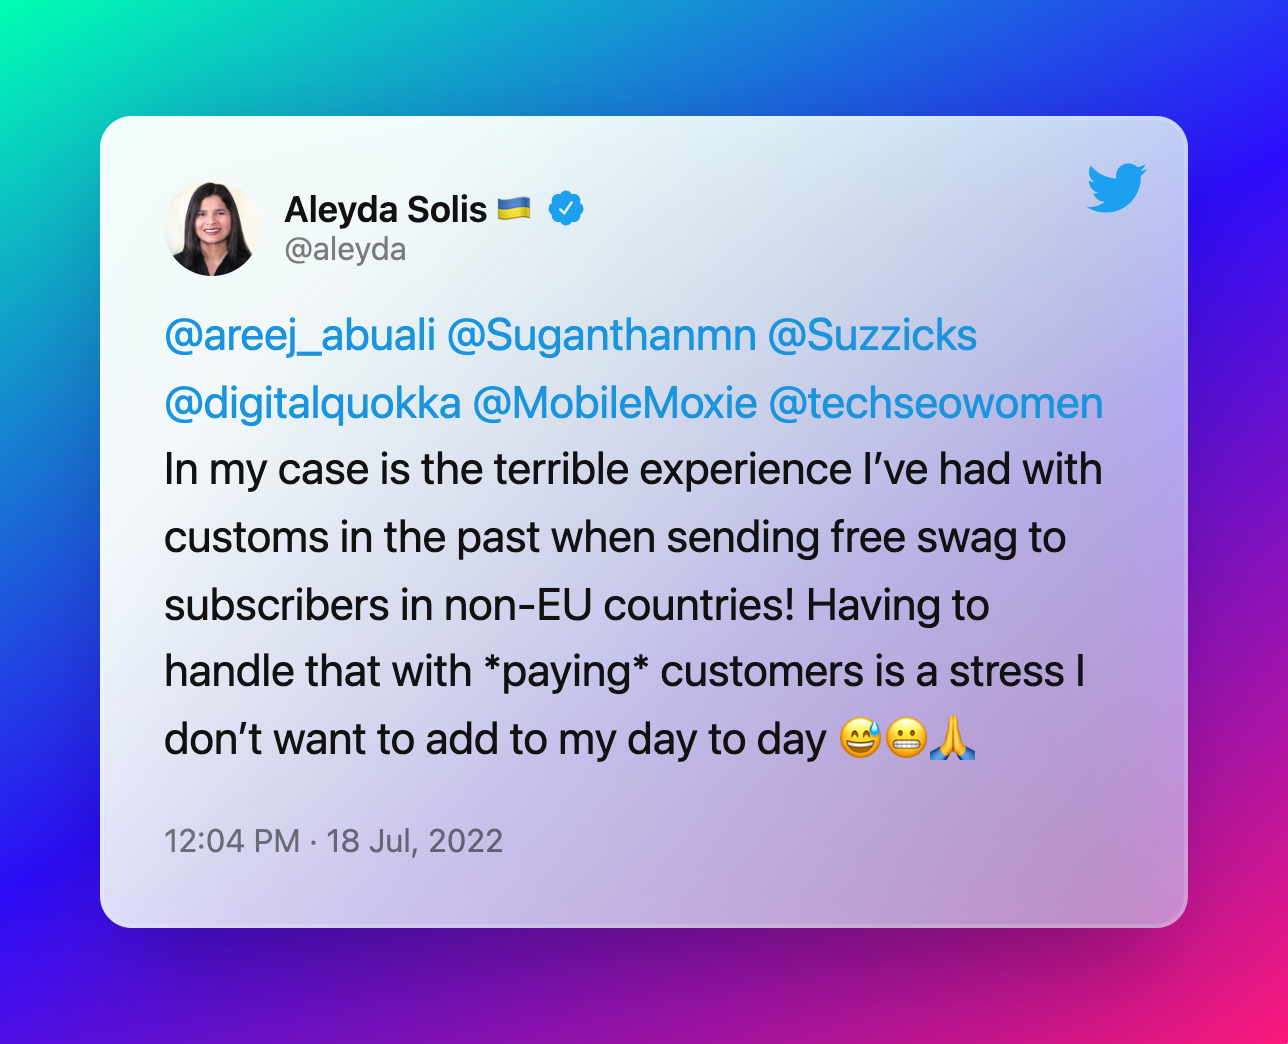 Aleyda Solis on customs fees associated with gifting.